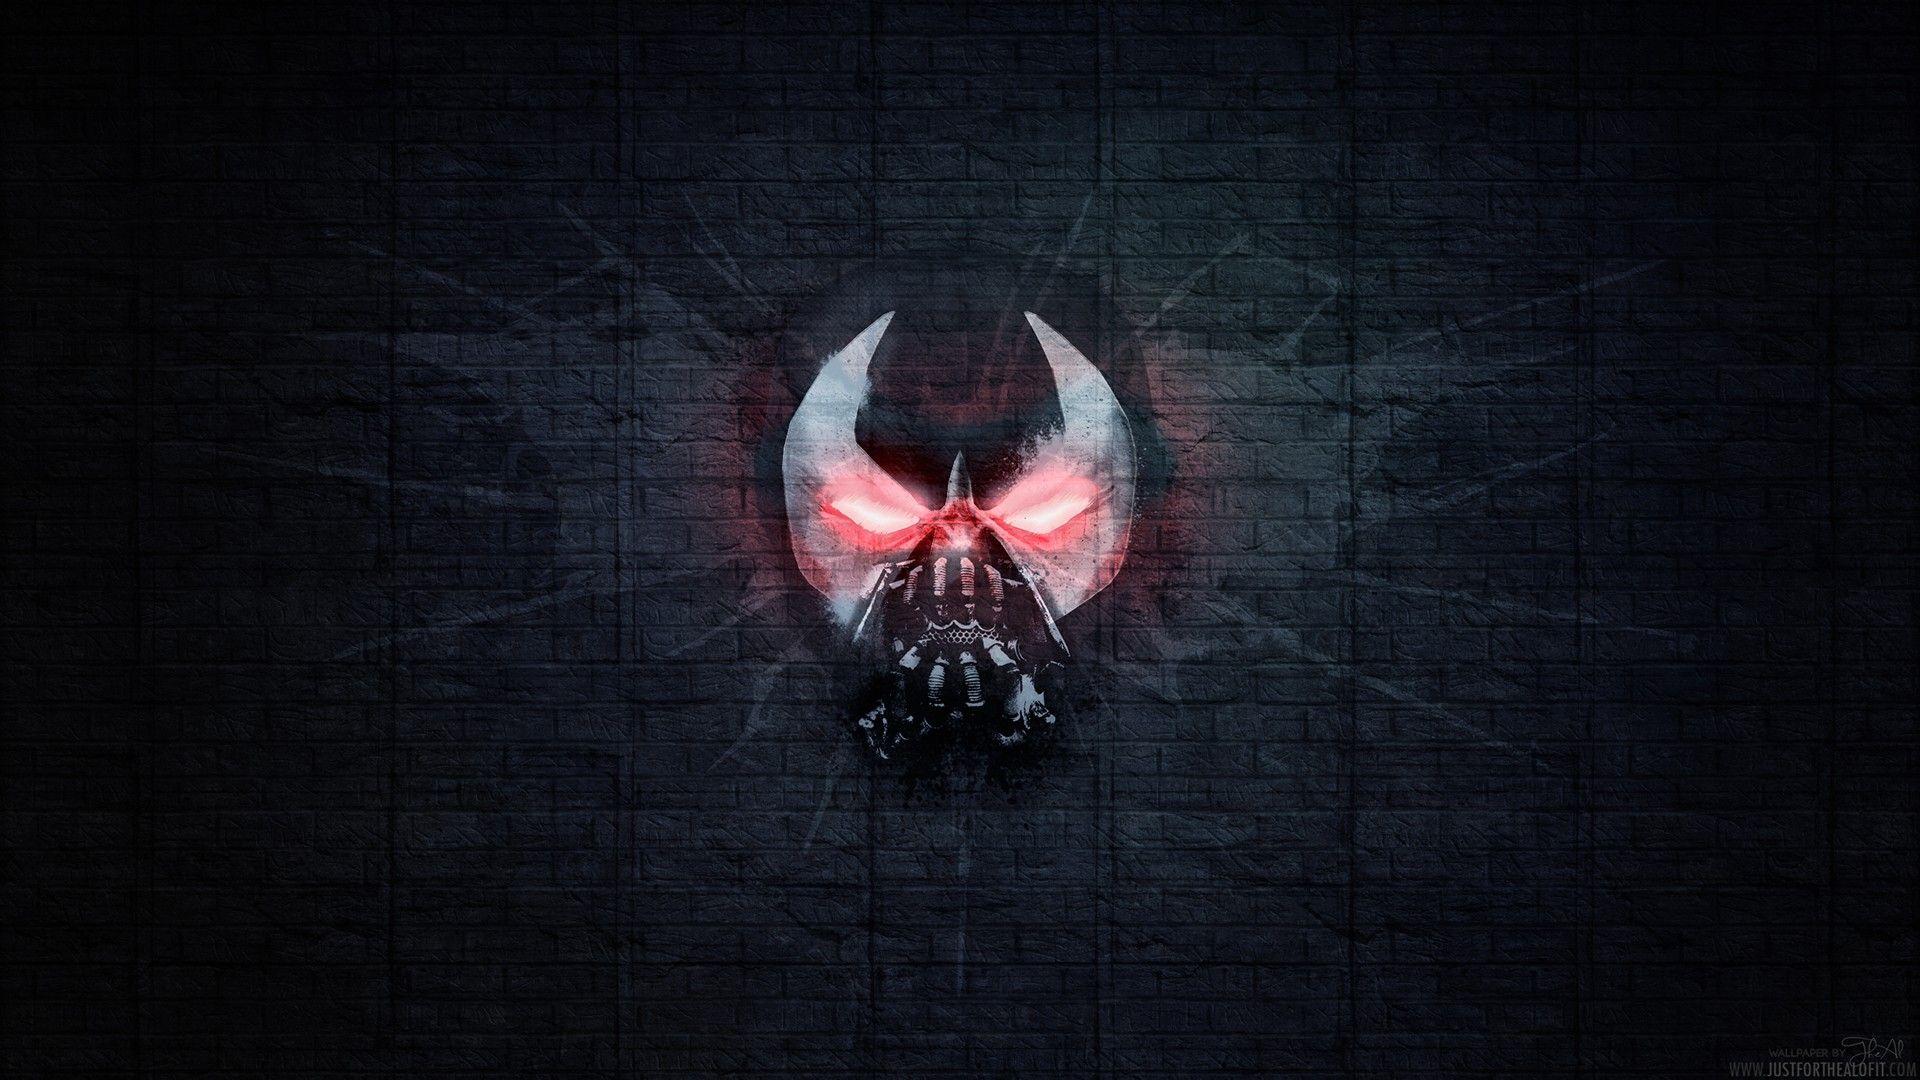 Download the Bane Wallpaper, Bane iPhone Wallpaper, Bane Android